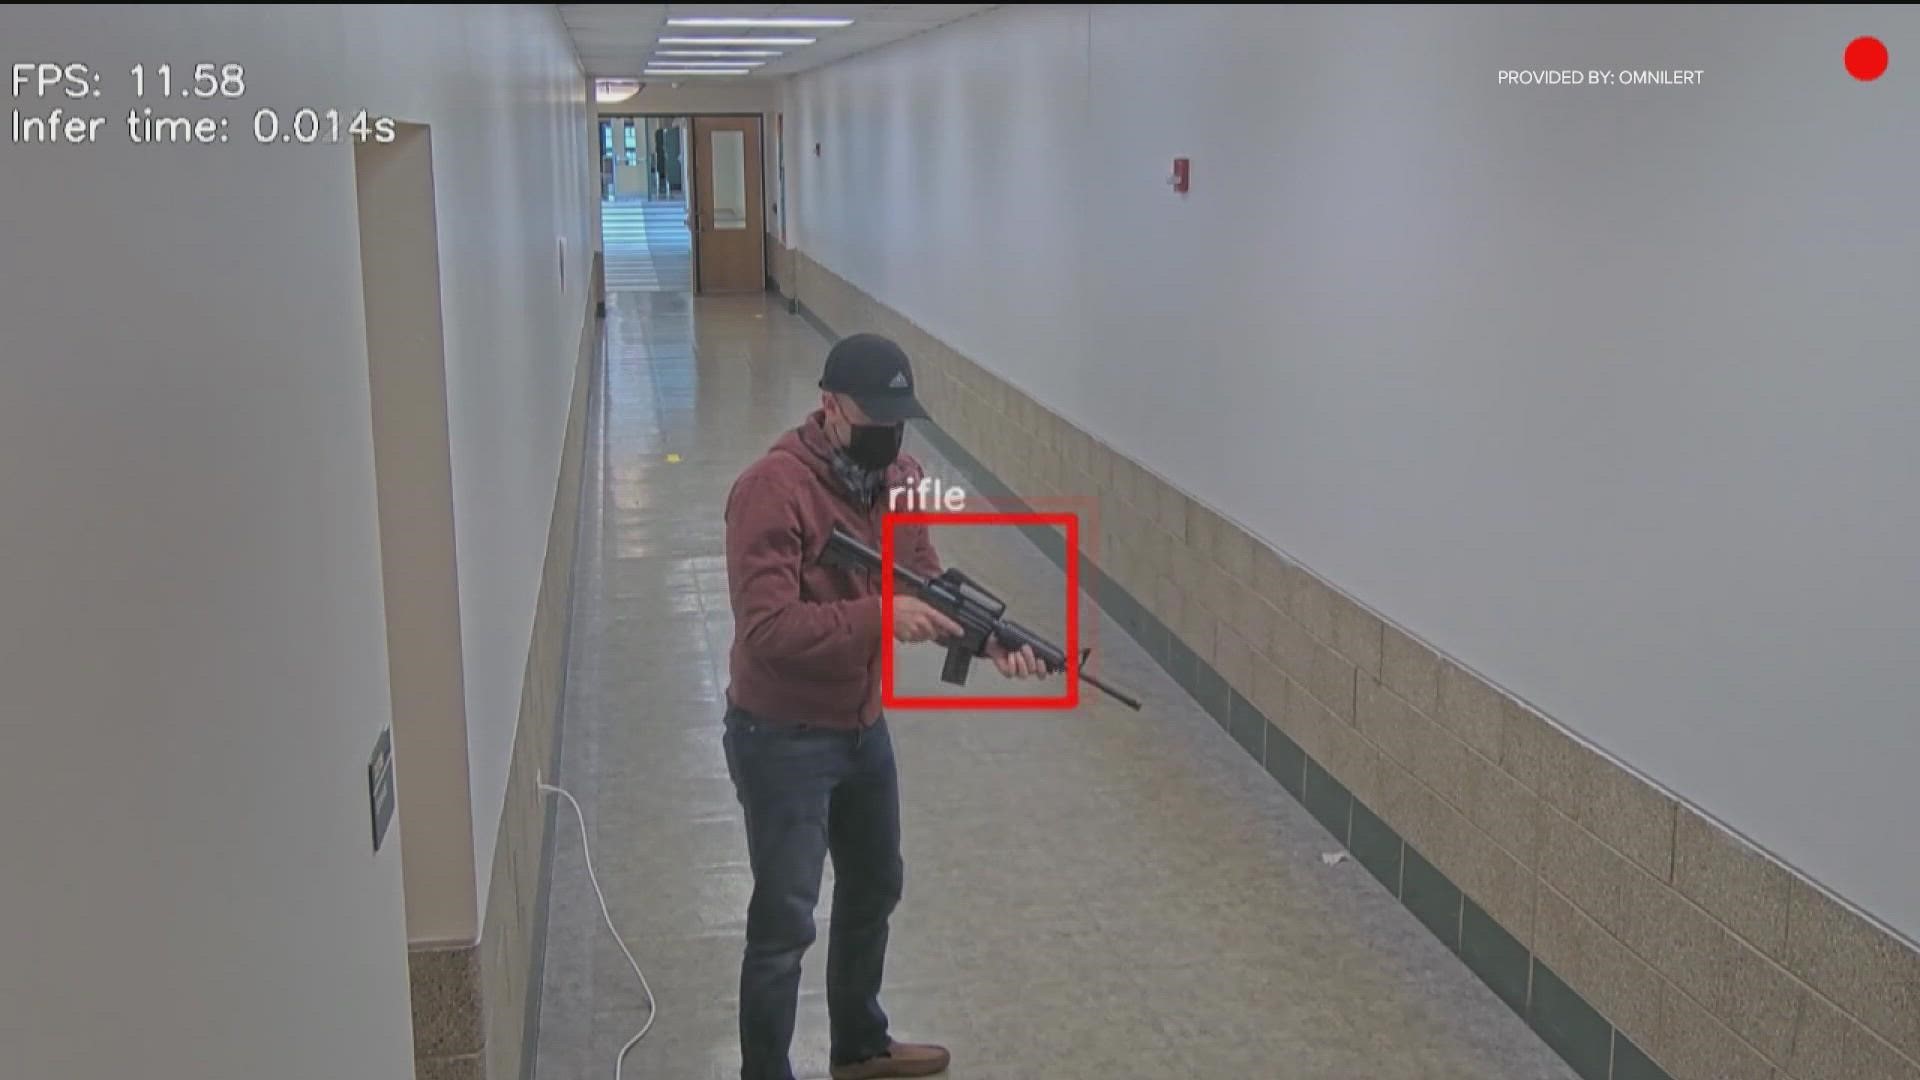 Omnilert uses Artificial Intelligence (AI) to detect guns and notifies authorities.